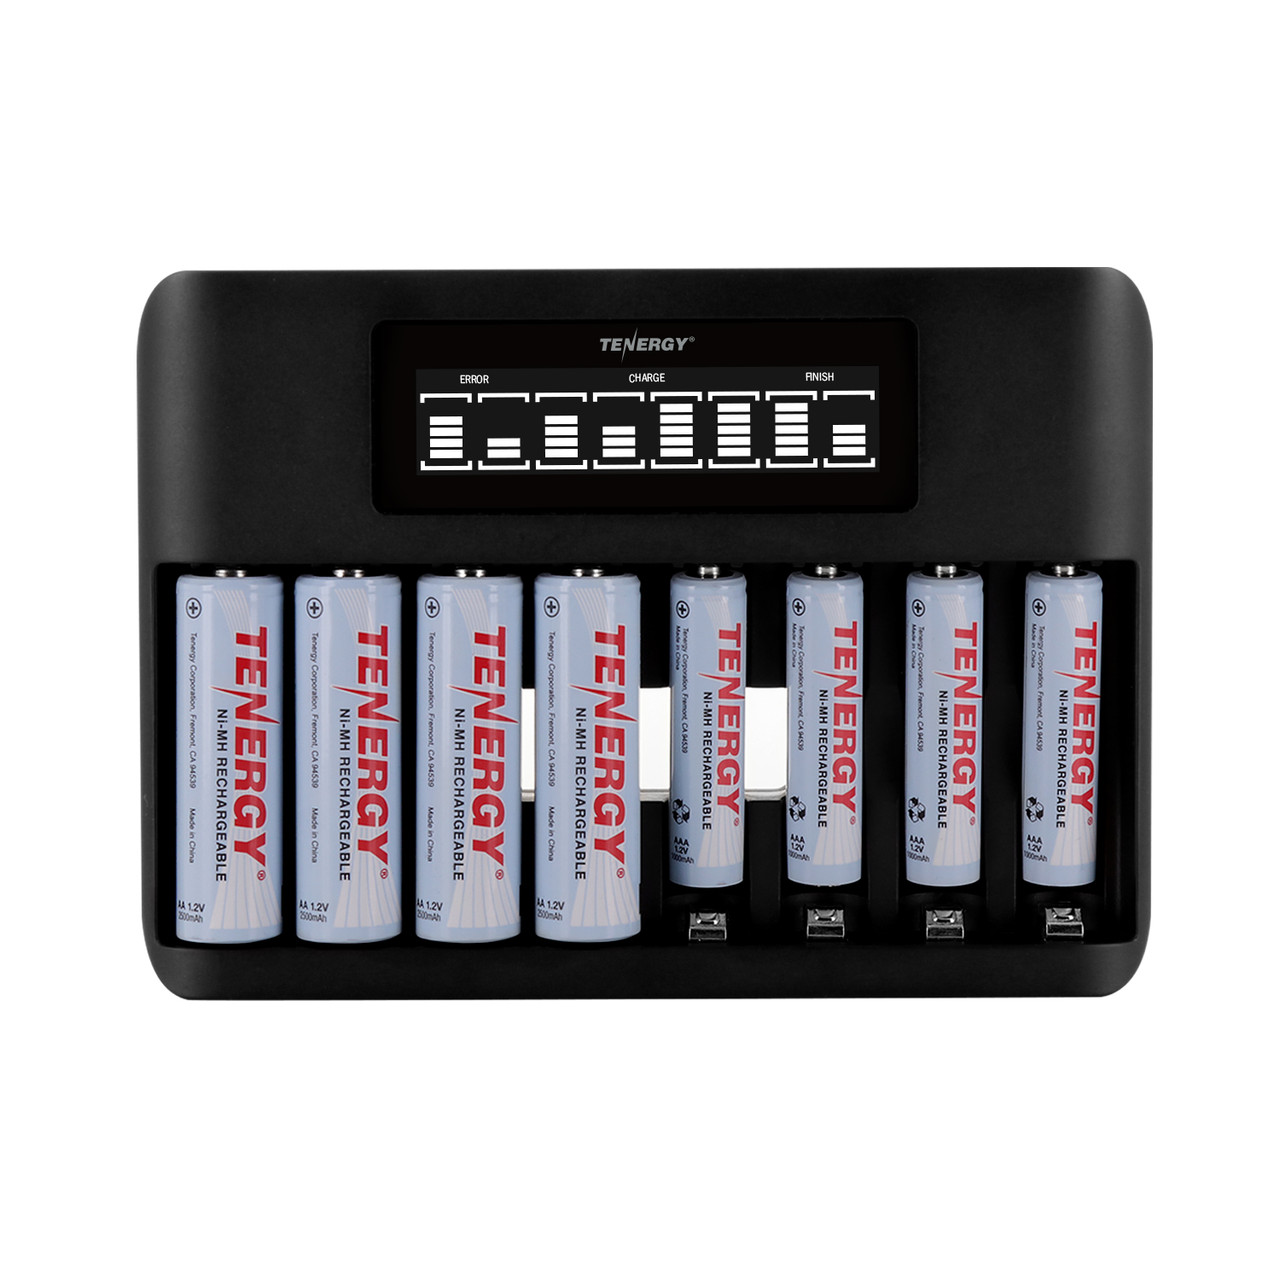 Combo: Tenergy TN480U 8-Bay NiMH Battery LCD Display Fast Charger + 4 pc 2500mah AA and 4pcs 1000mah AAA Rechargeable Batteries